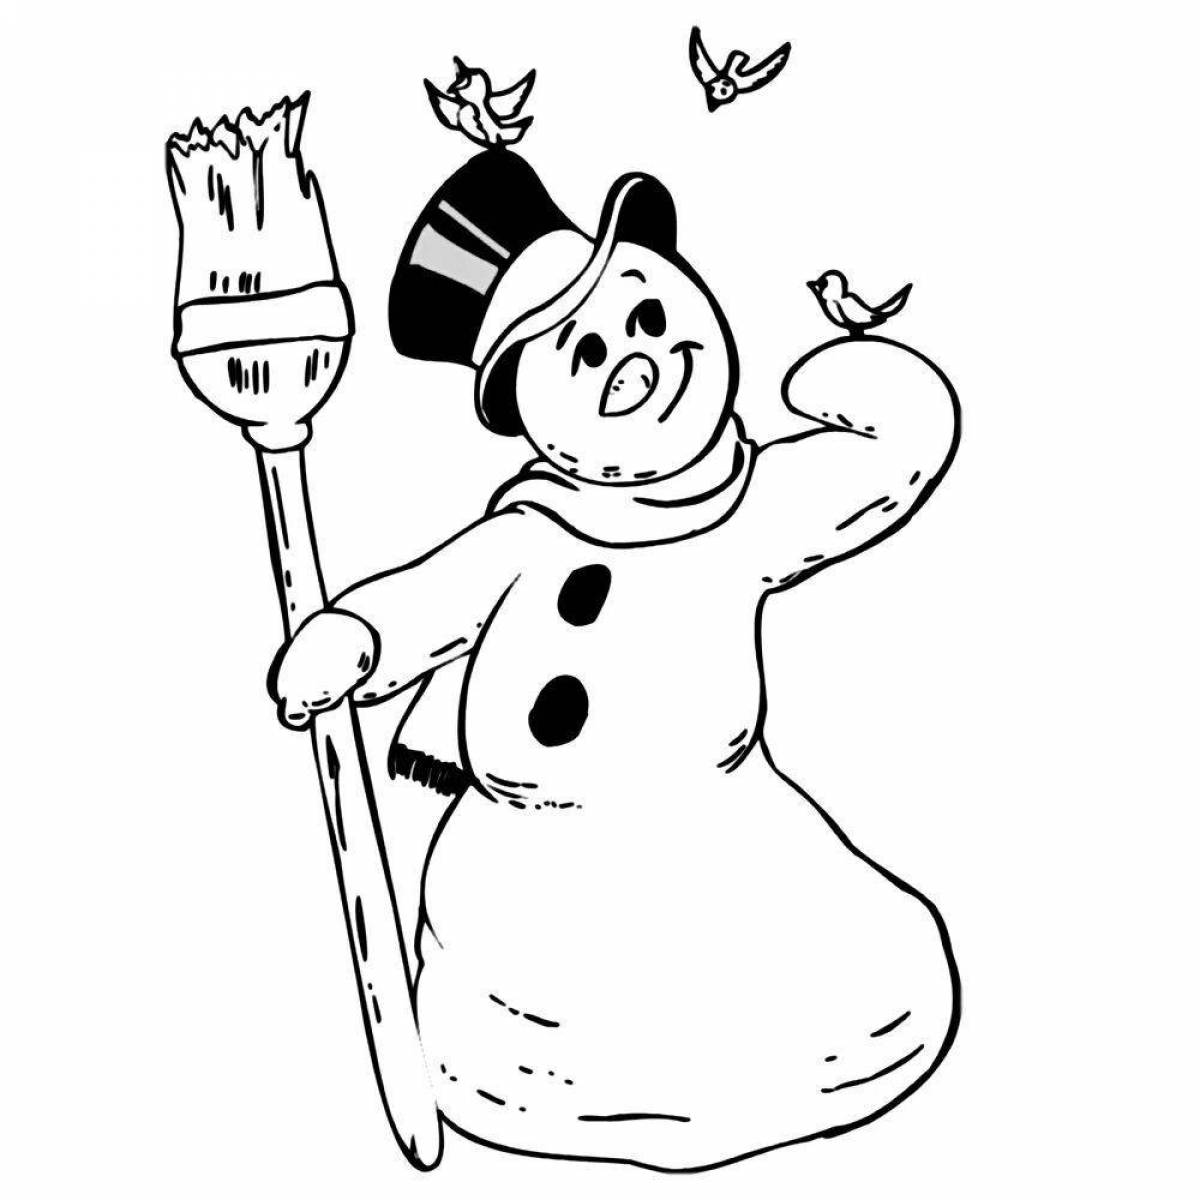 Adorable snowman family coloring page